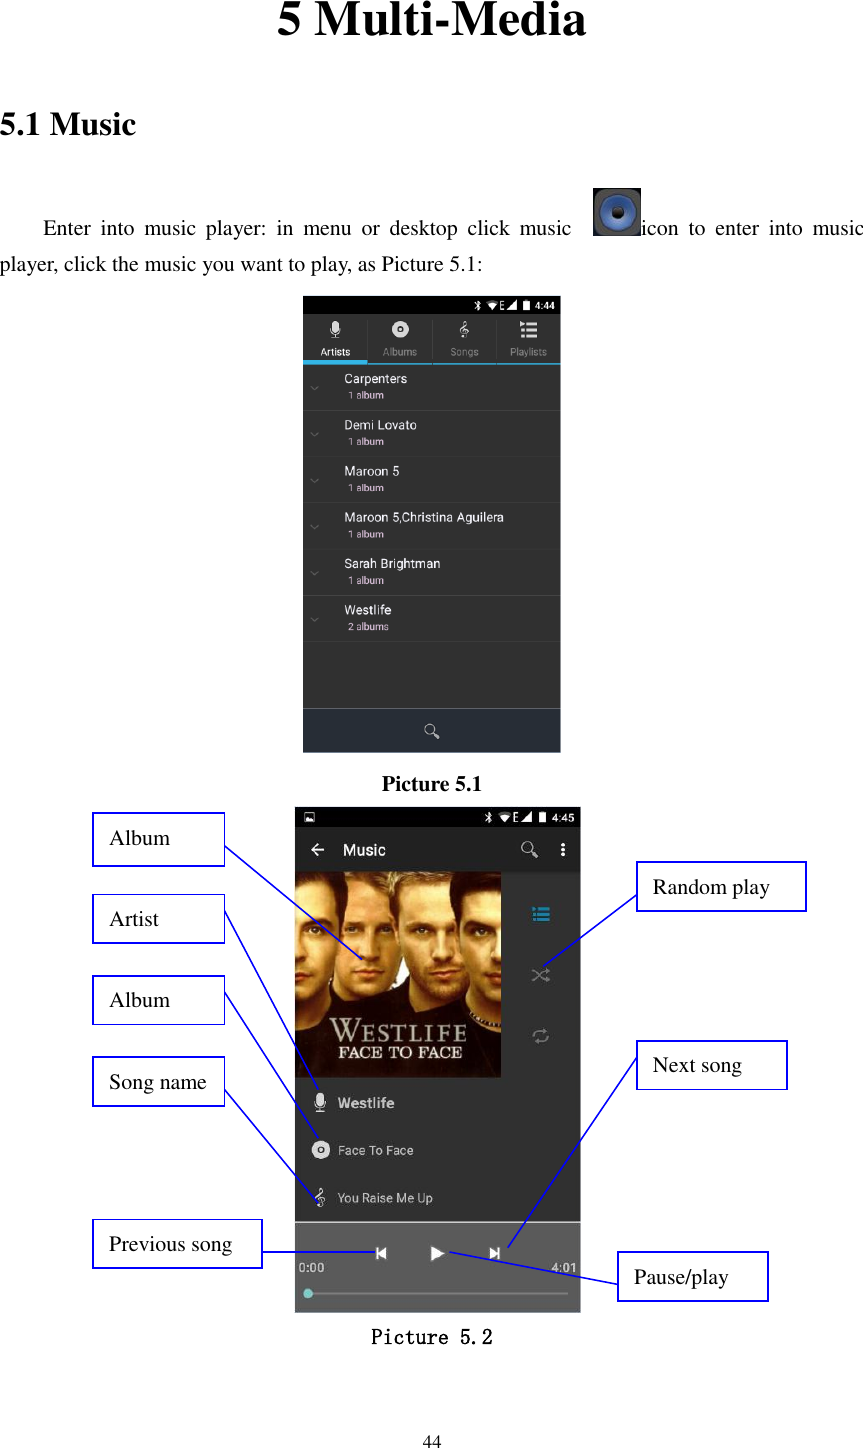      44 5 Multi-Media 5.1 Music Enter  into  music  player:  in  menu  or  desktop  click  music    icon  to  enter  into  music player, click the music you want to play, as Picture 5.1:    Picture 5.1    Picture 5.2  Album Pause/play Next song Previous song Artist Album Song name Random play 